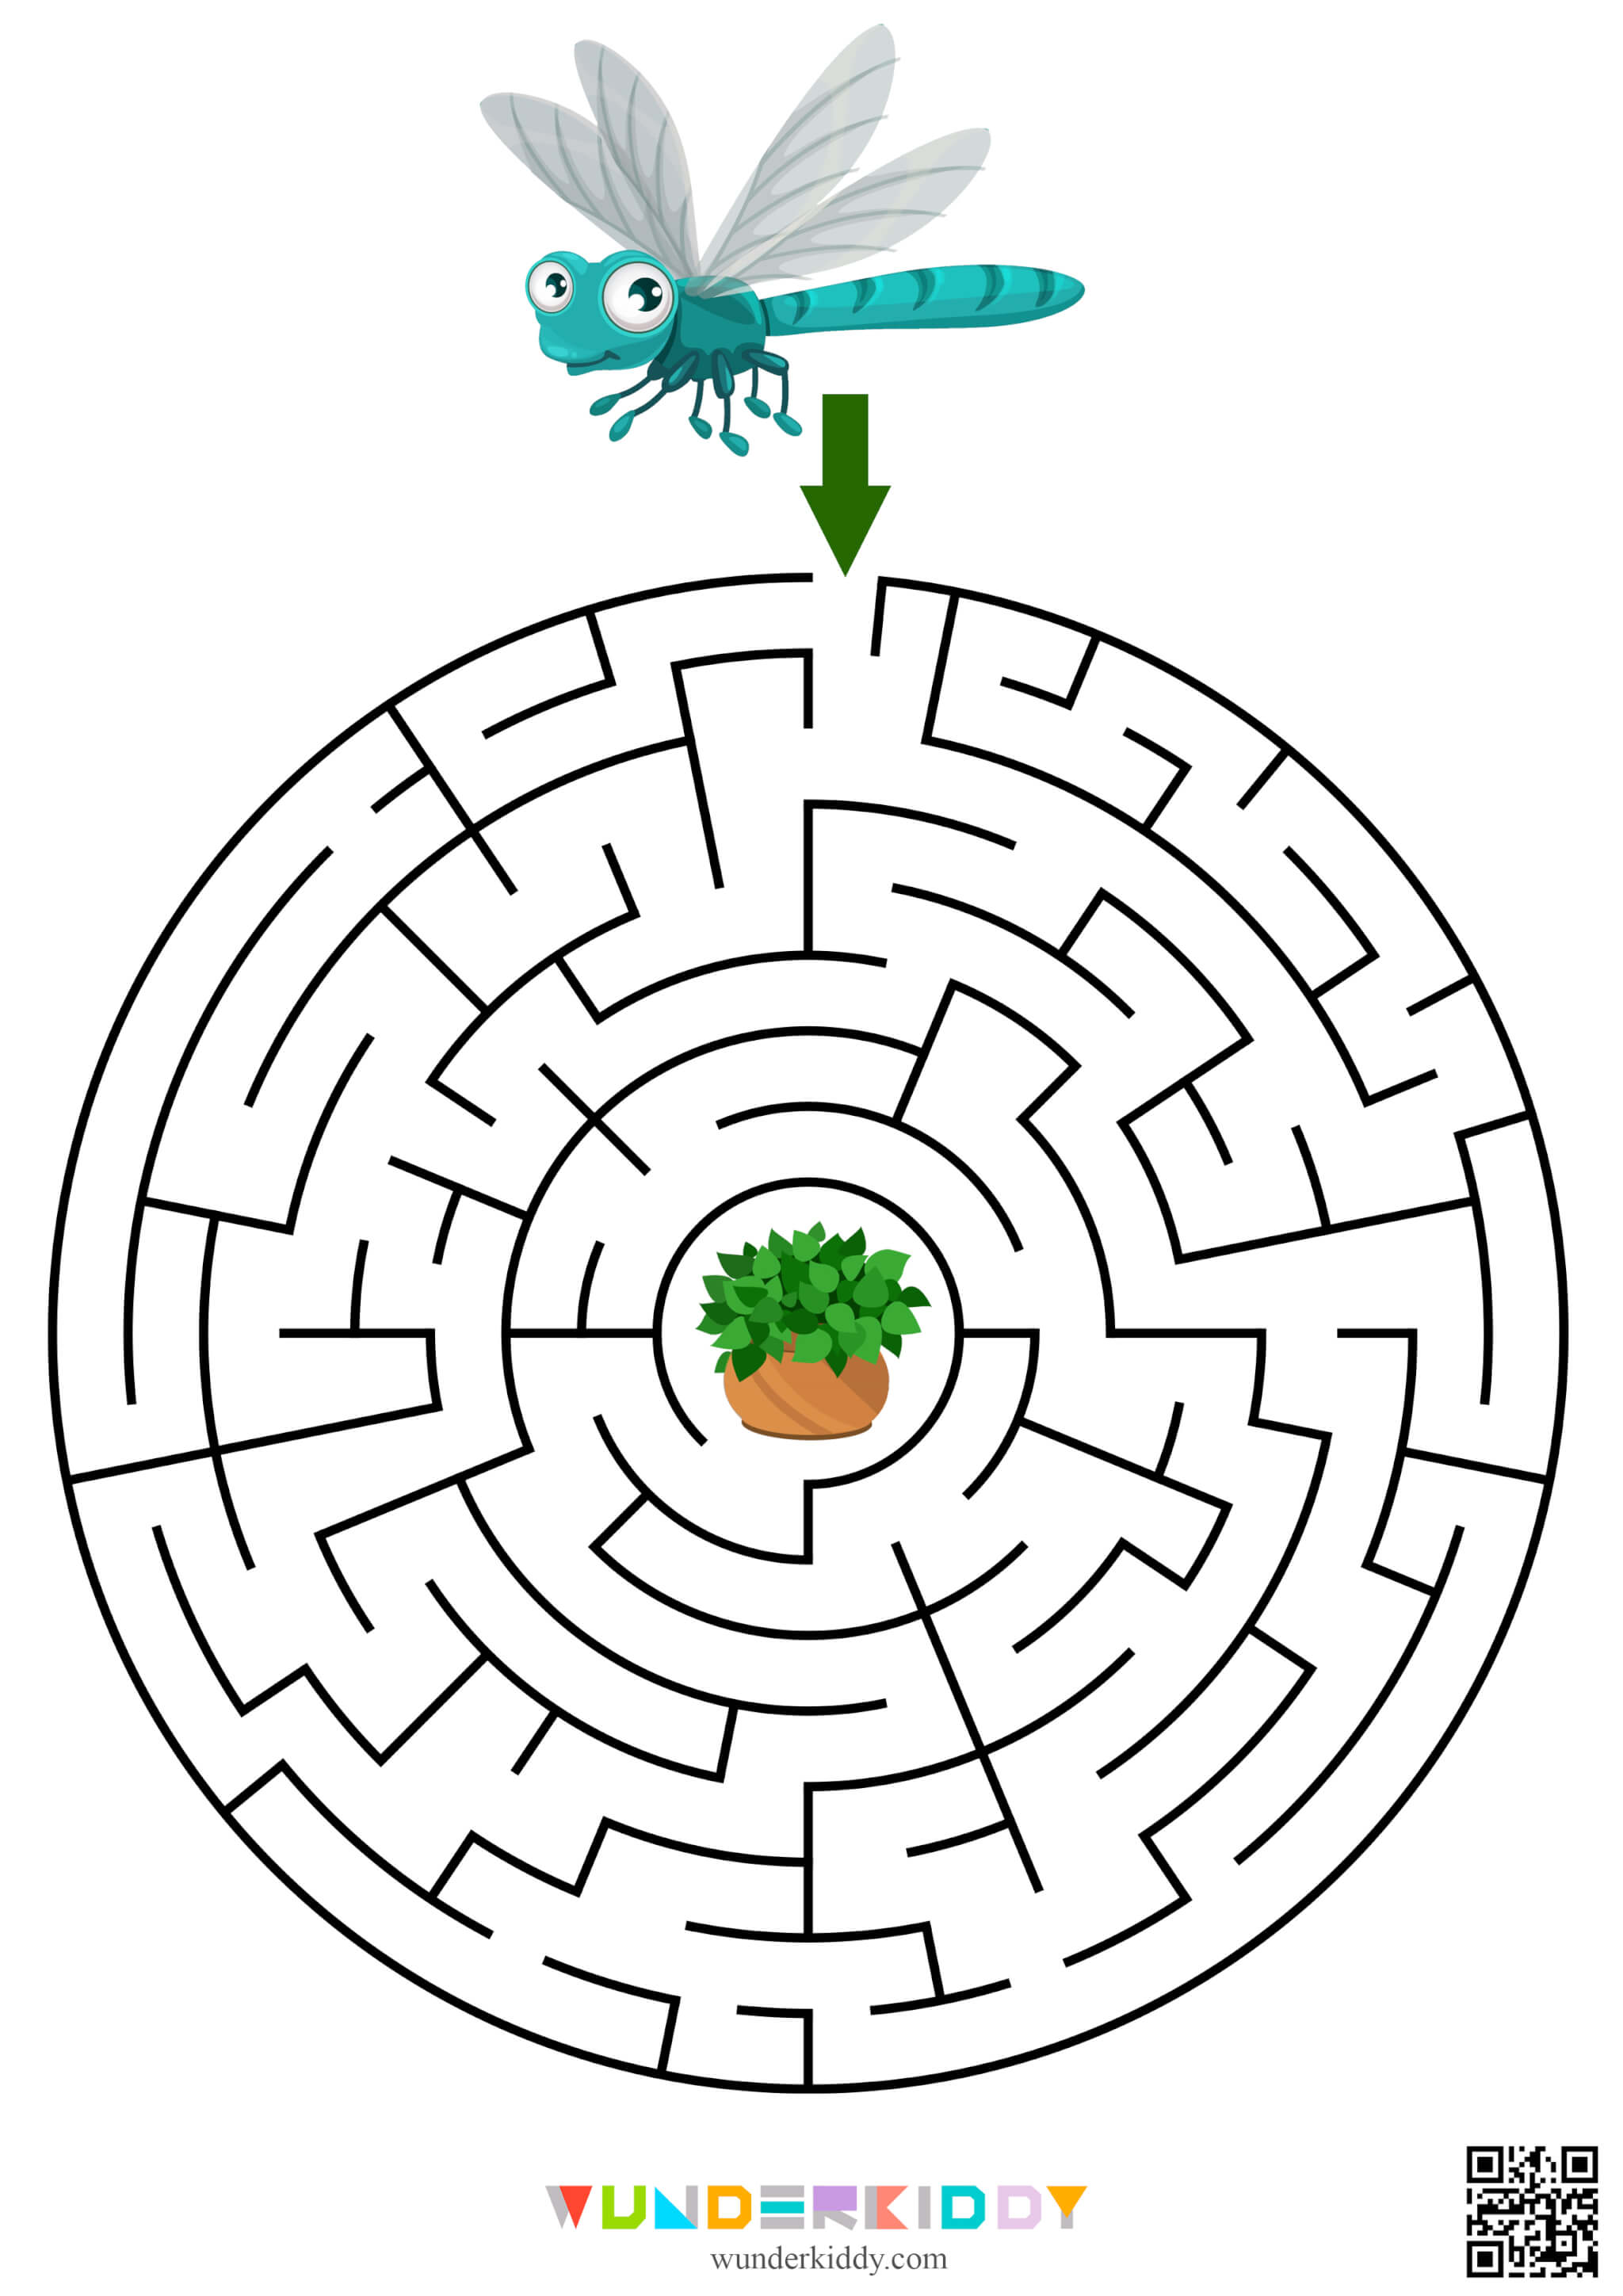 Printable Maze for Kids Help to Find the Way - Image 9